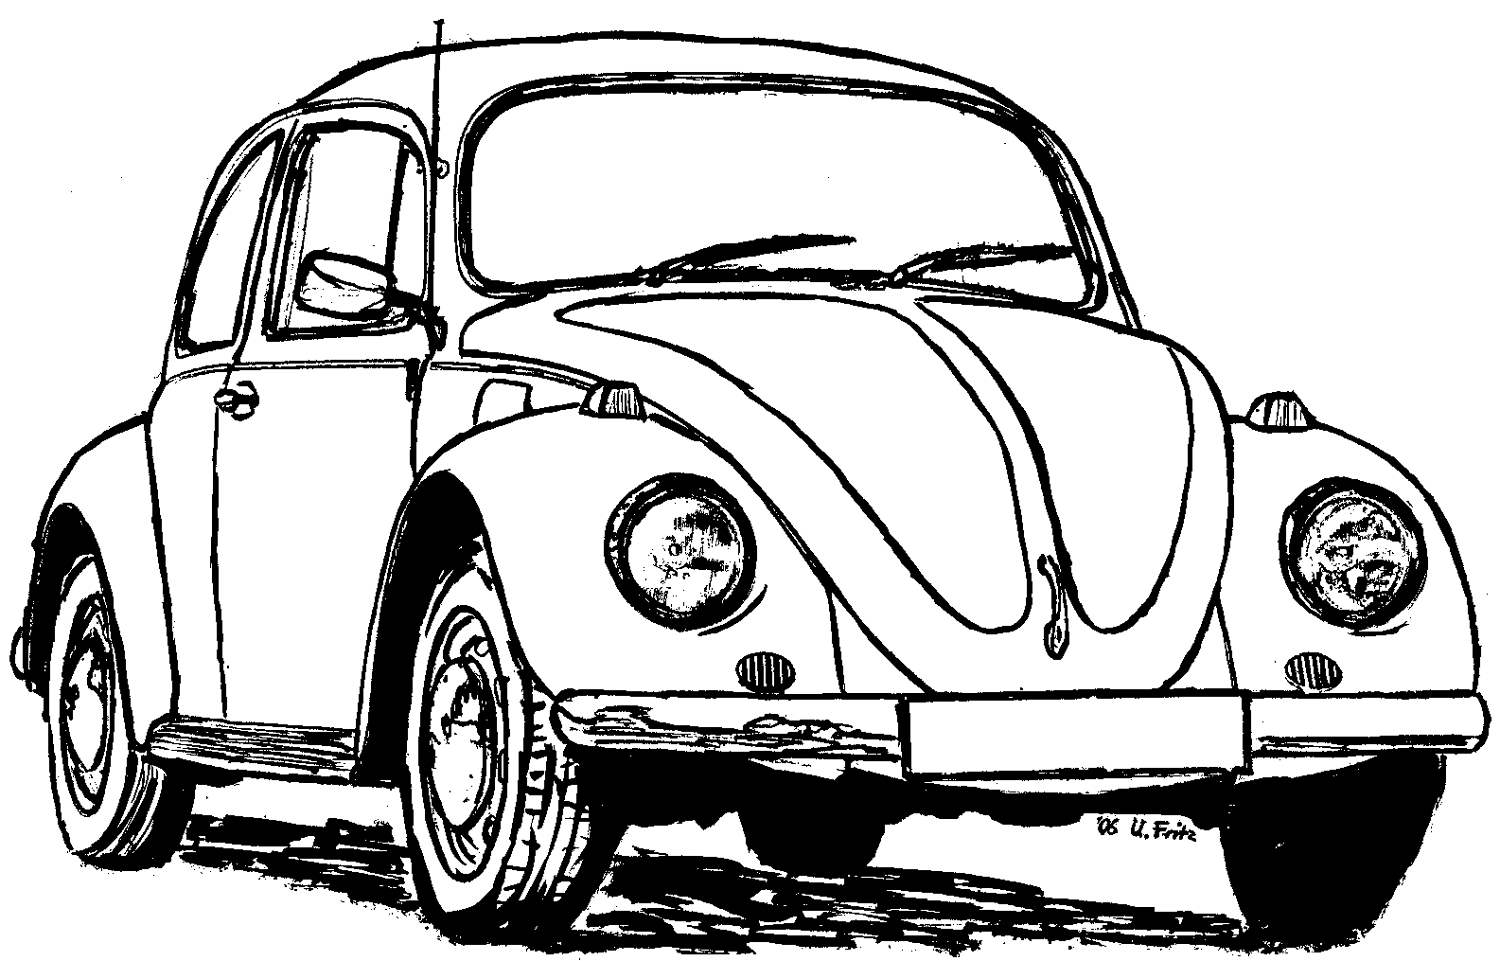 Vw Beetle Coloring Pages Vw Cars Coloring Pages Beetle Drawing | My XXX ...